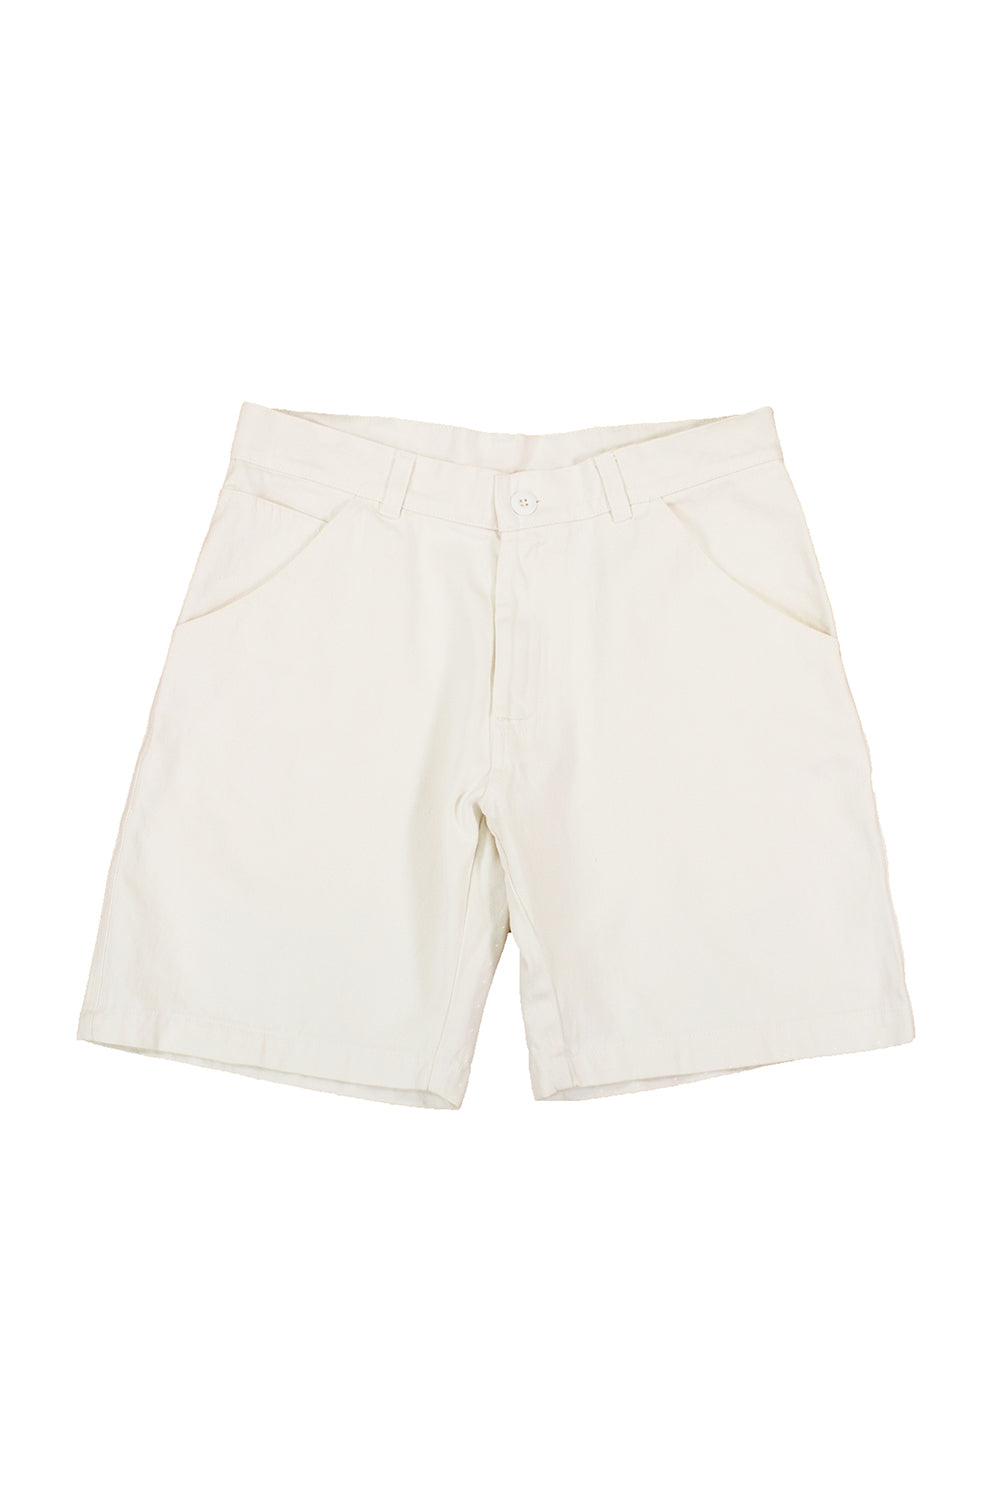 Mountain Short | Jungmaven Hemp Clothing & Accessories / Color: Washed White